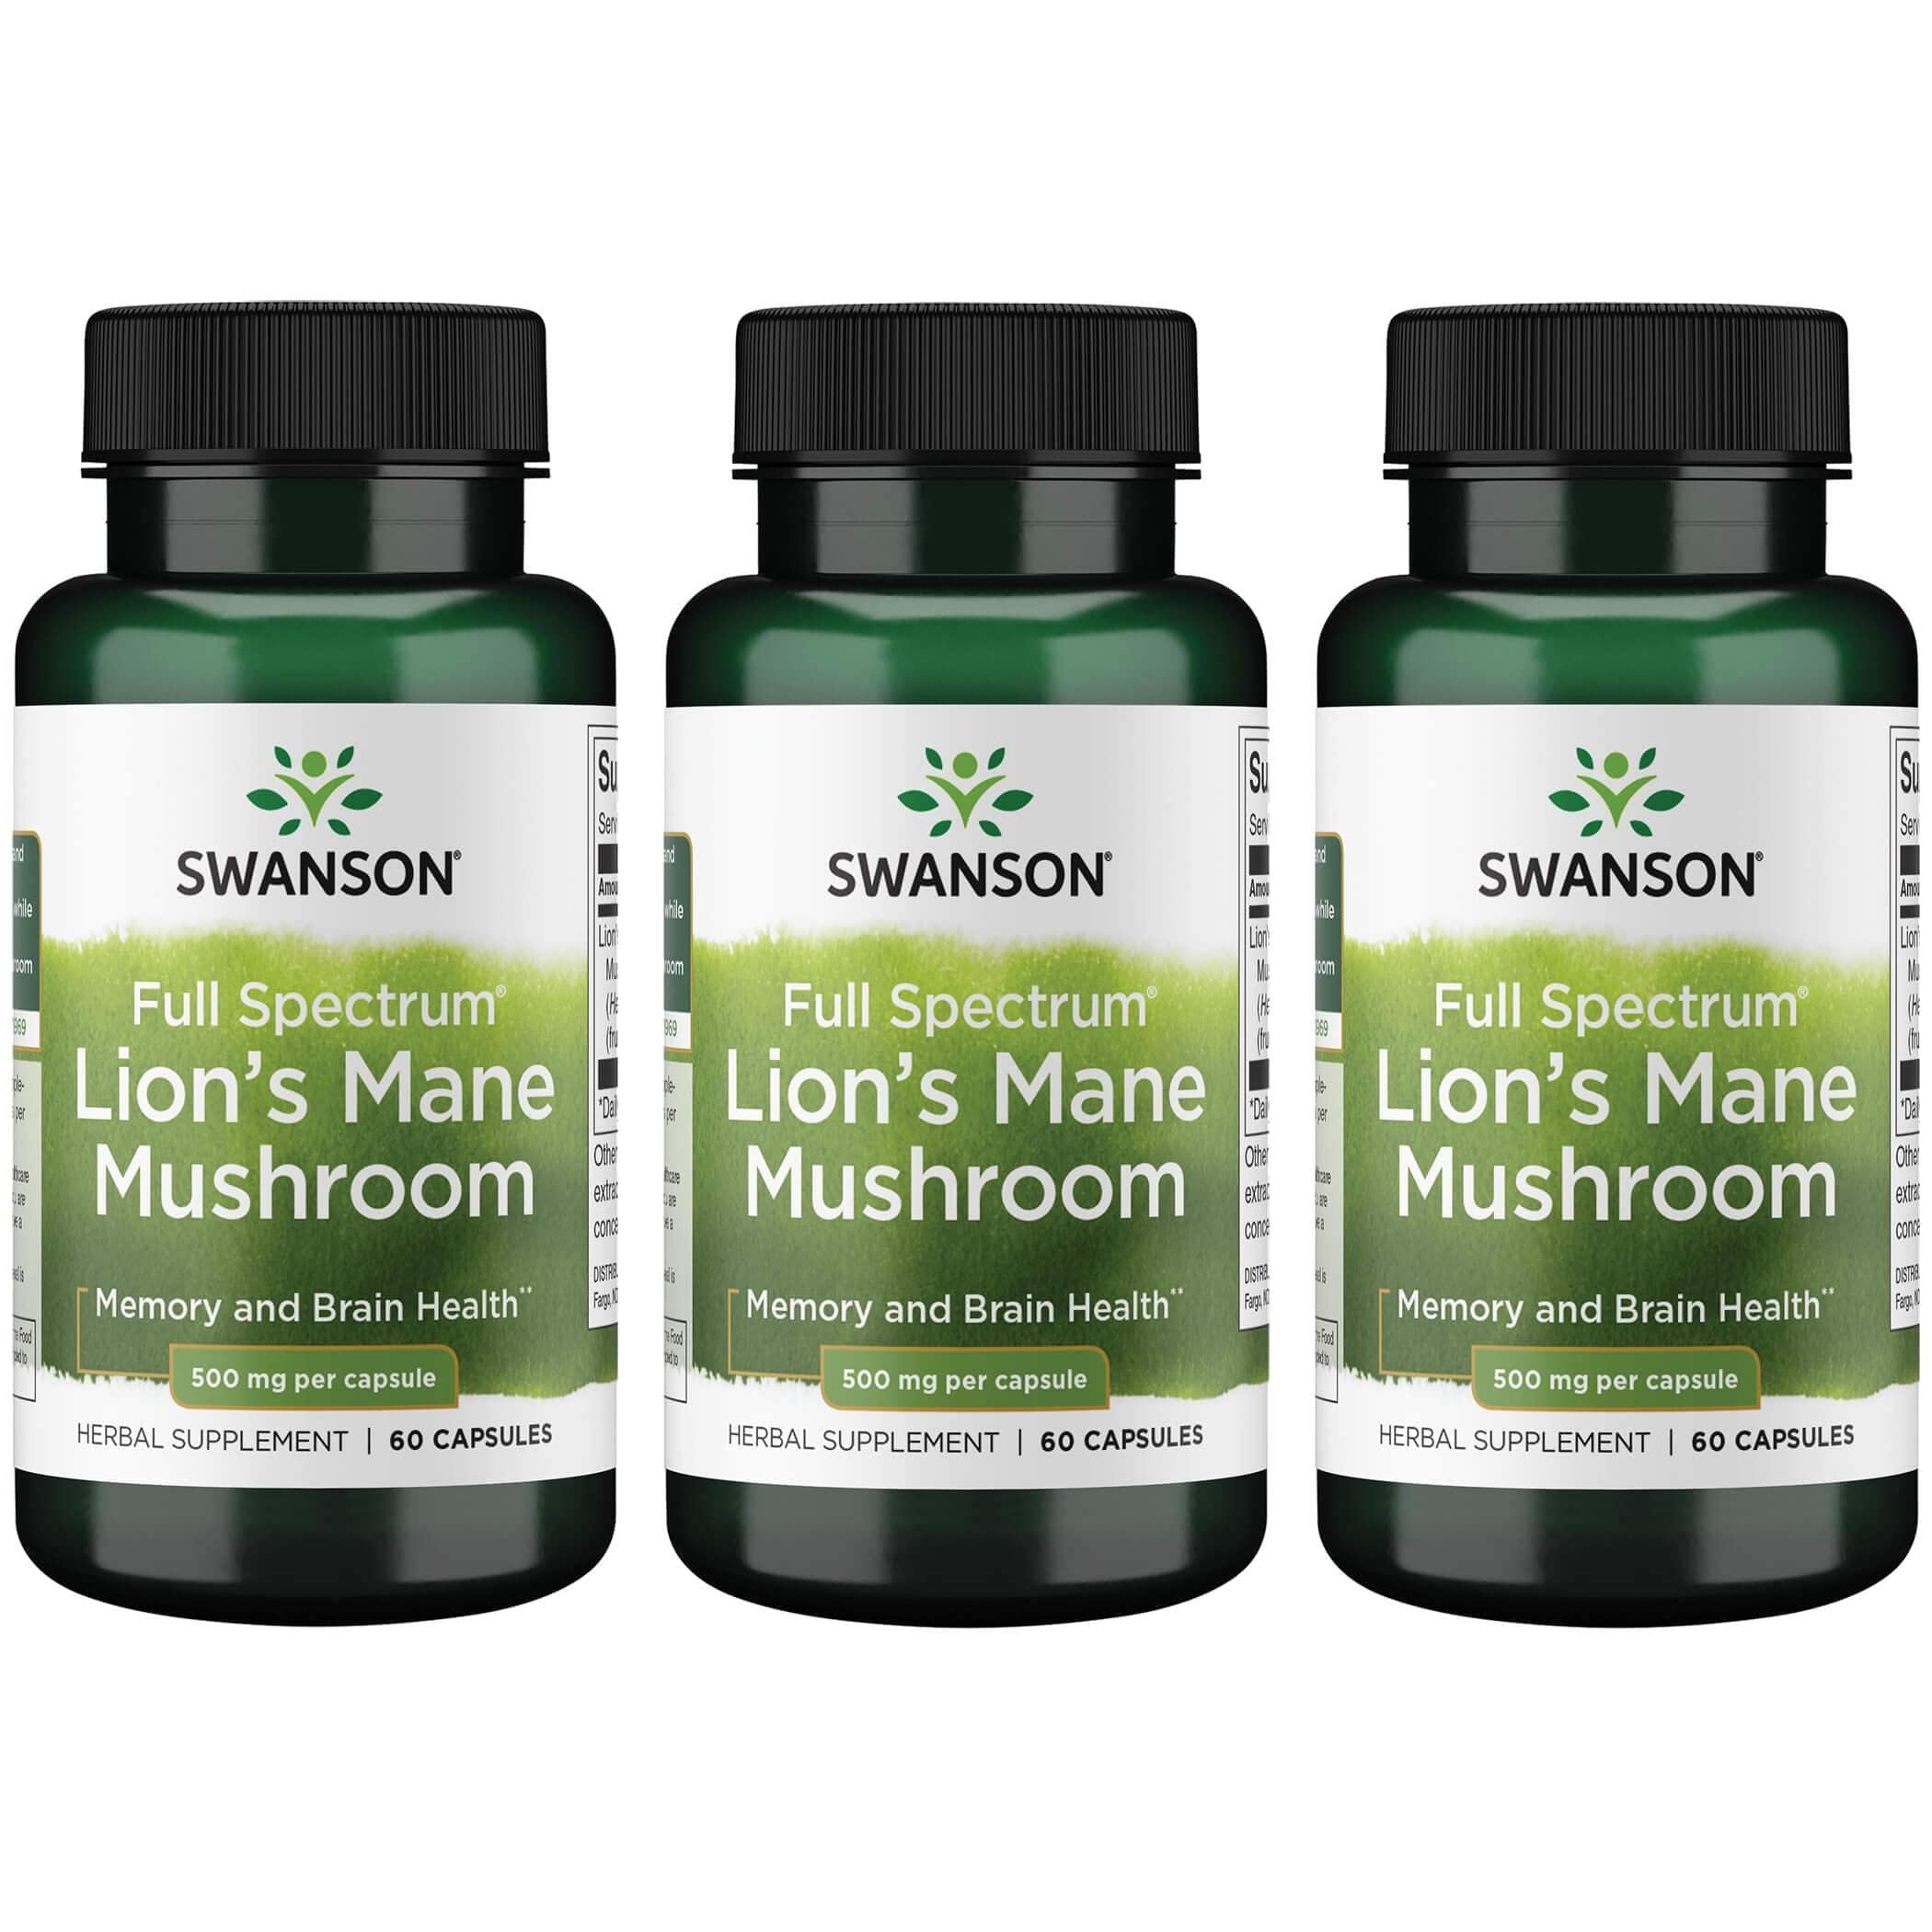 Swanson Lion's Mane Mushroom Capsules - 500 mg Each, 60 Capsules - Herbal Supplement Supporting Cognitive Function (3 Pack)